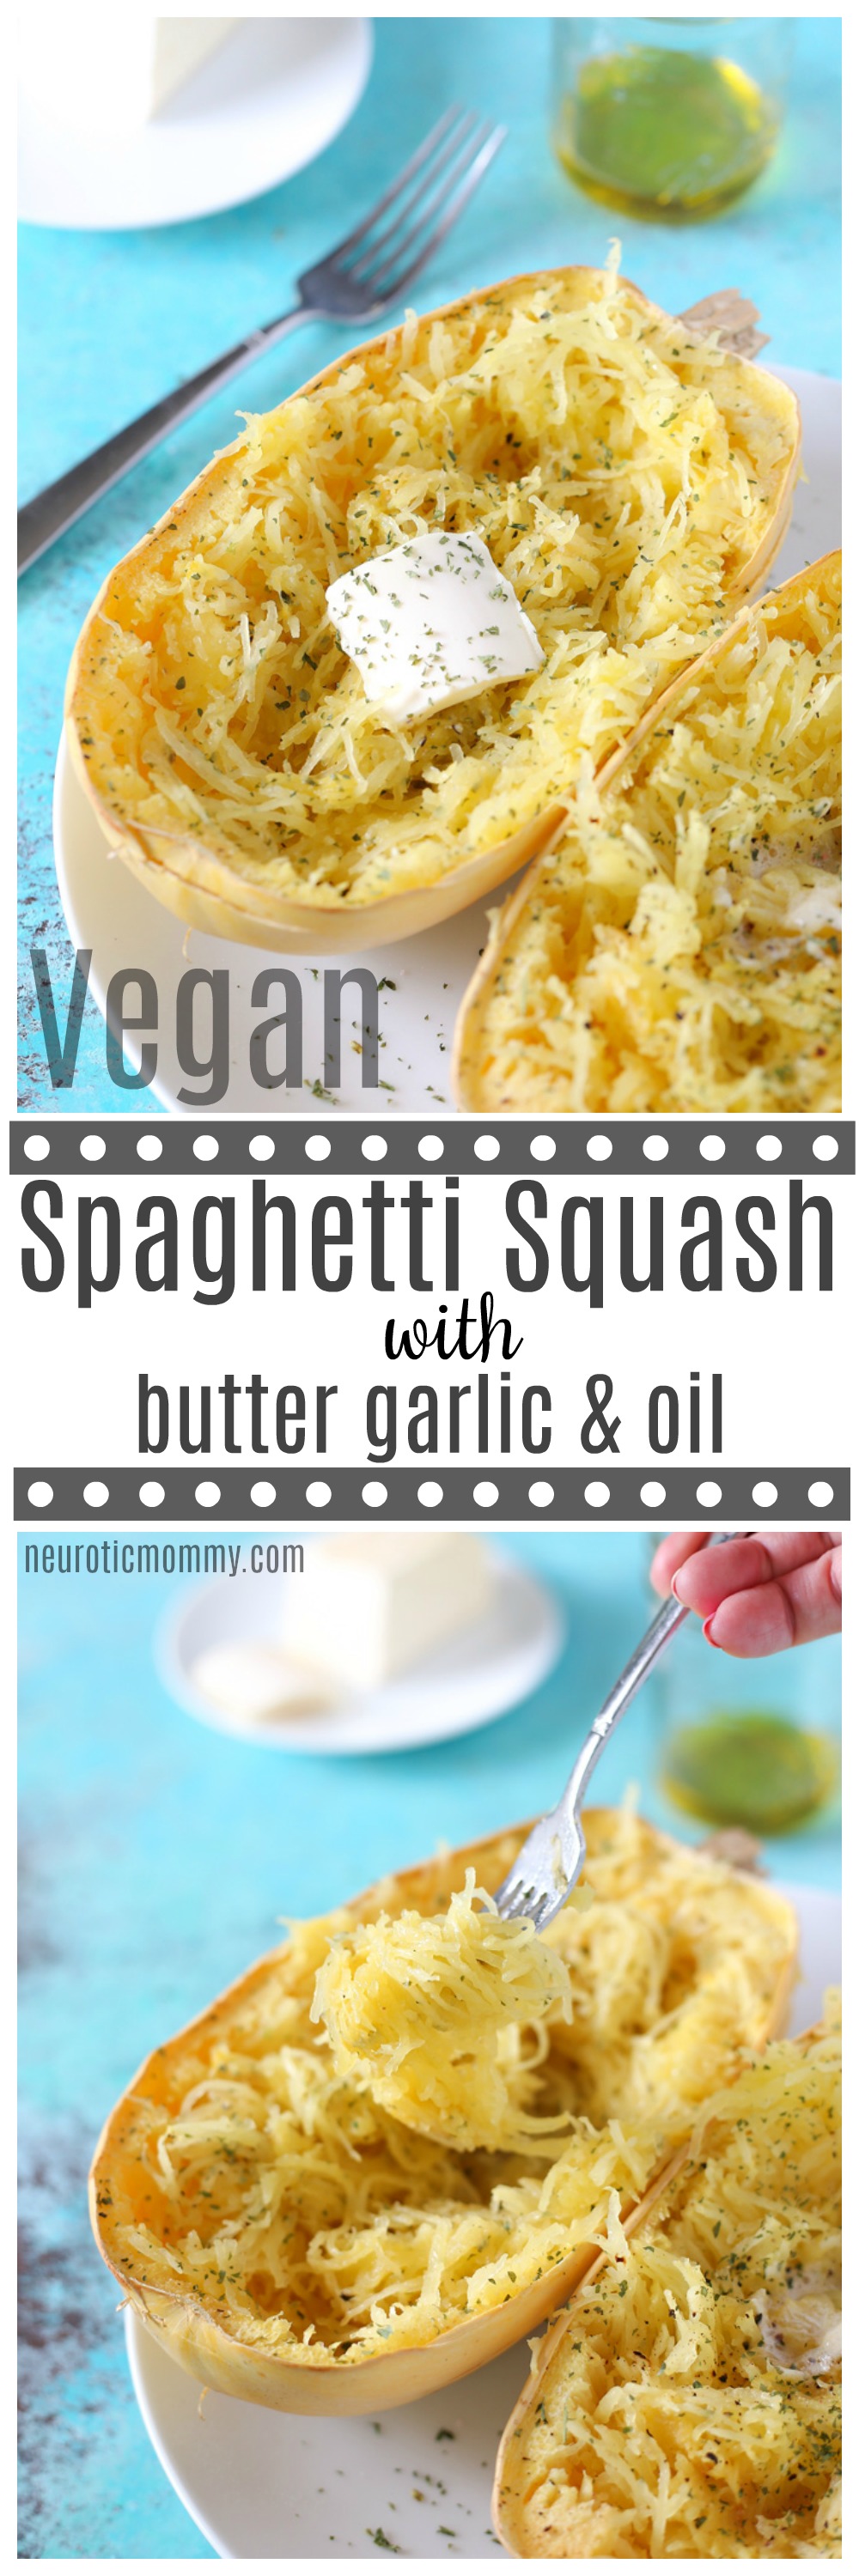 My Favorite Way To Eat Spaghetti Squash - Using garlic, olive oil and vegan butter, it's one of the easiest most delicious ways to enjoy this vegetable. NeuroticMommy.com #squash #spaghetti #lowcarb 